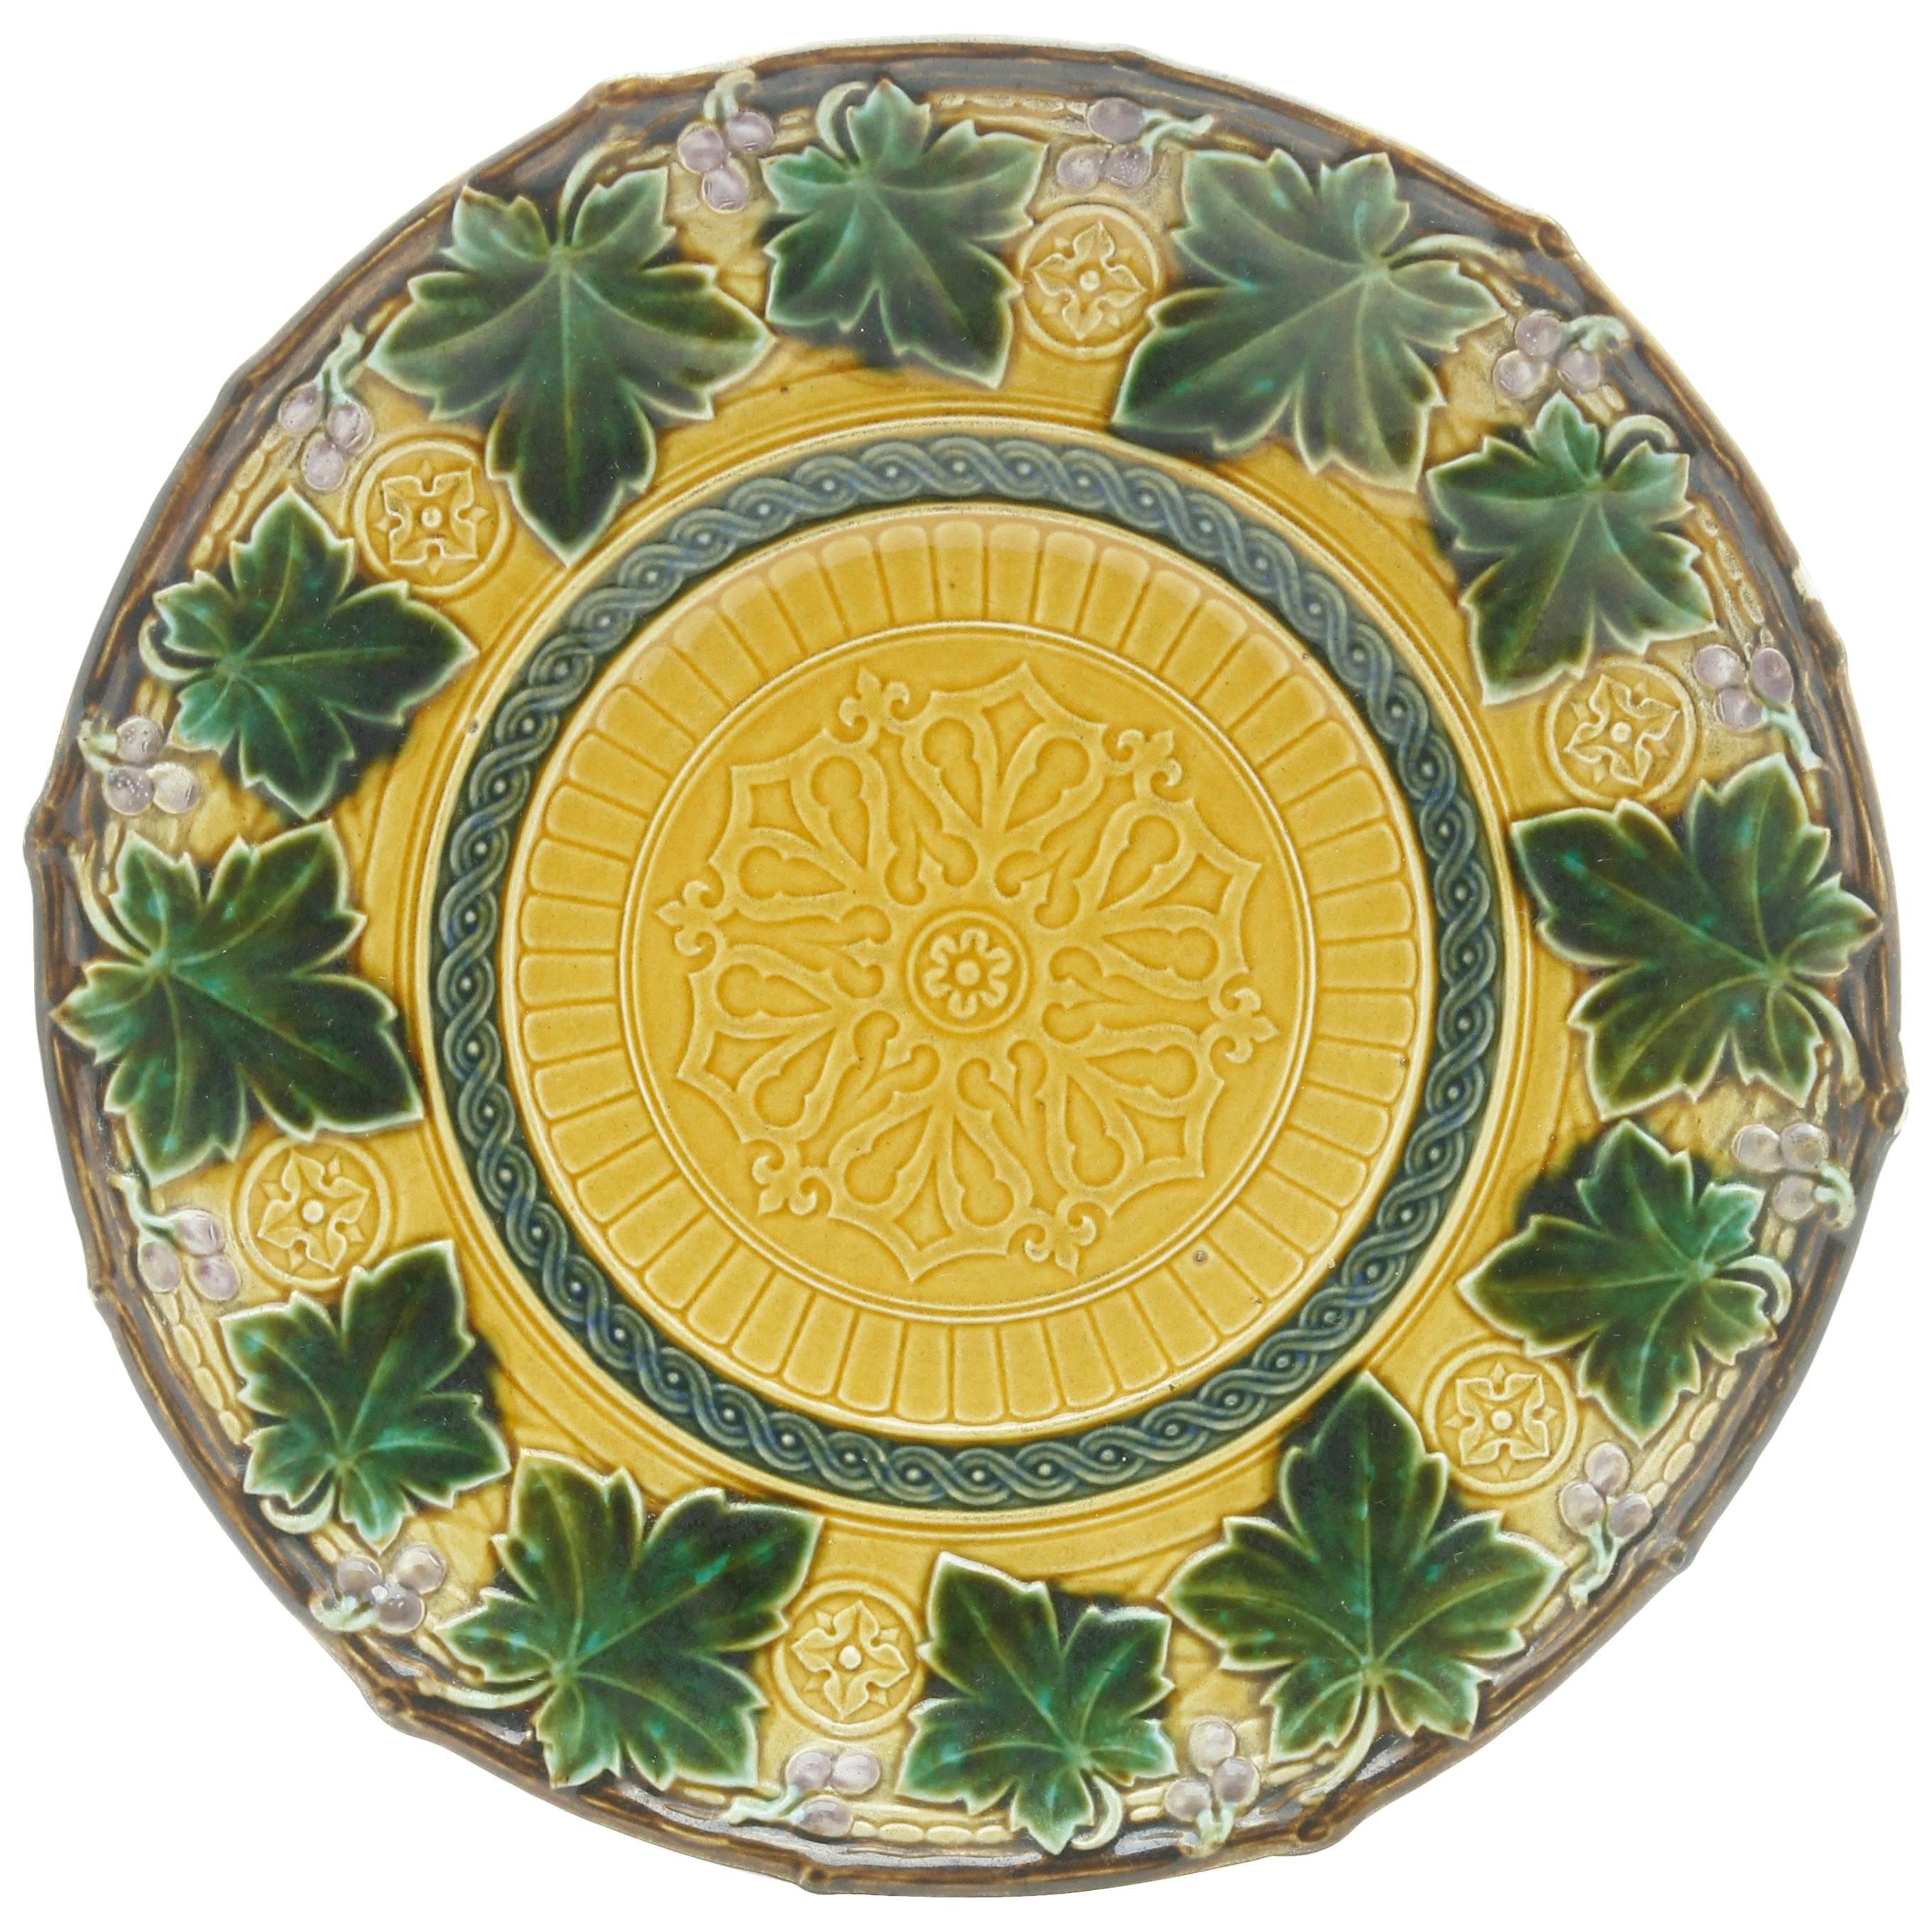 Art Nouveau Majolica Pattern in Relief Set of 16 Plates Whit Boch Stamp, 1900s